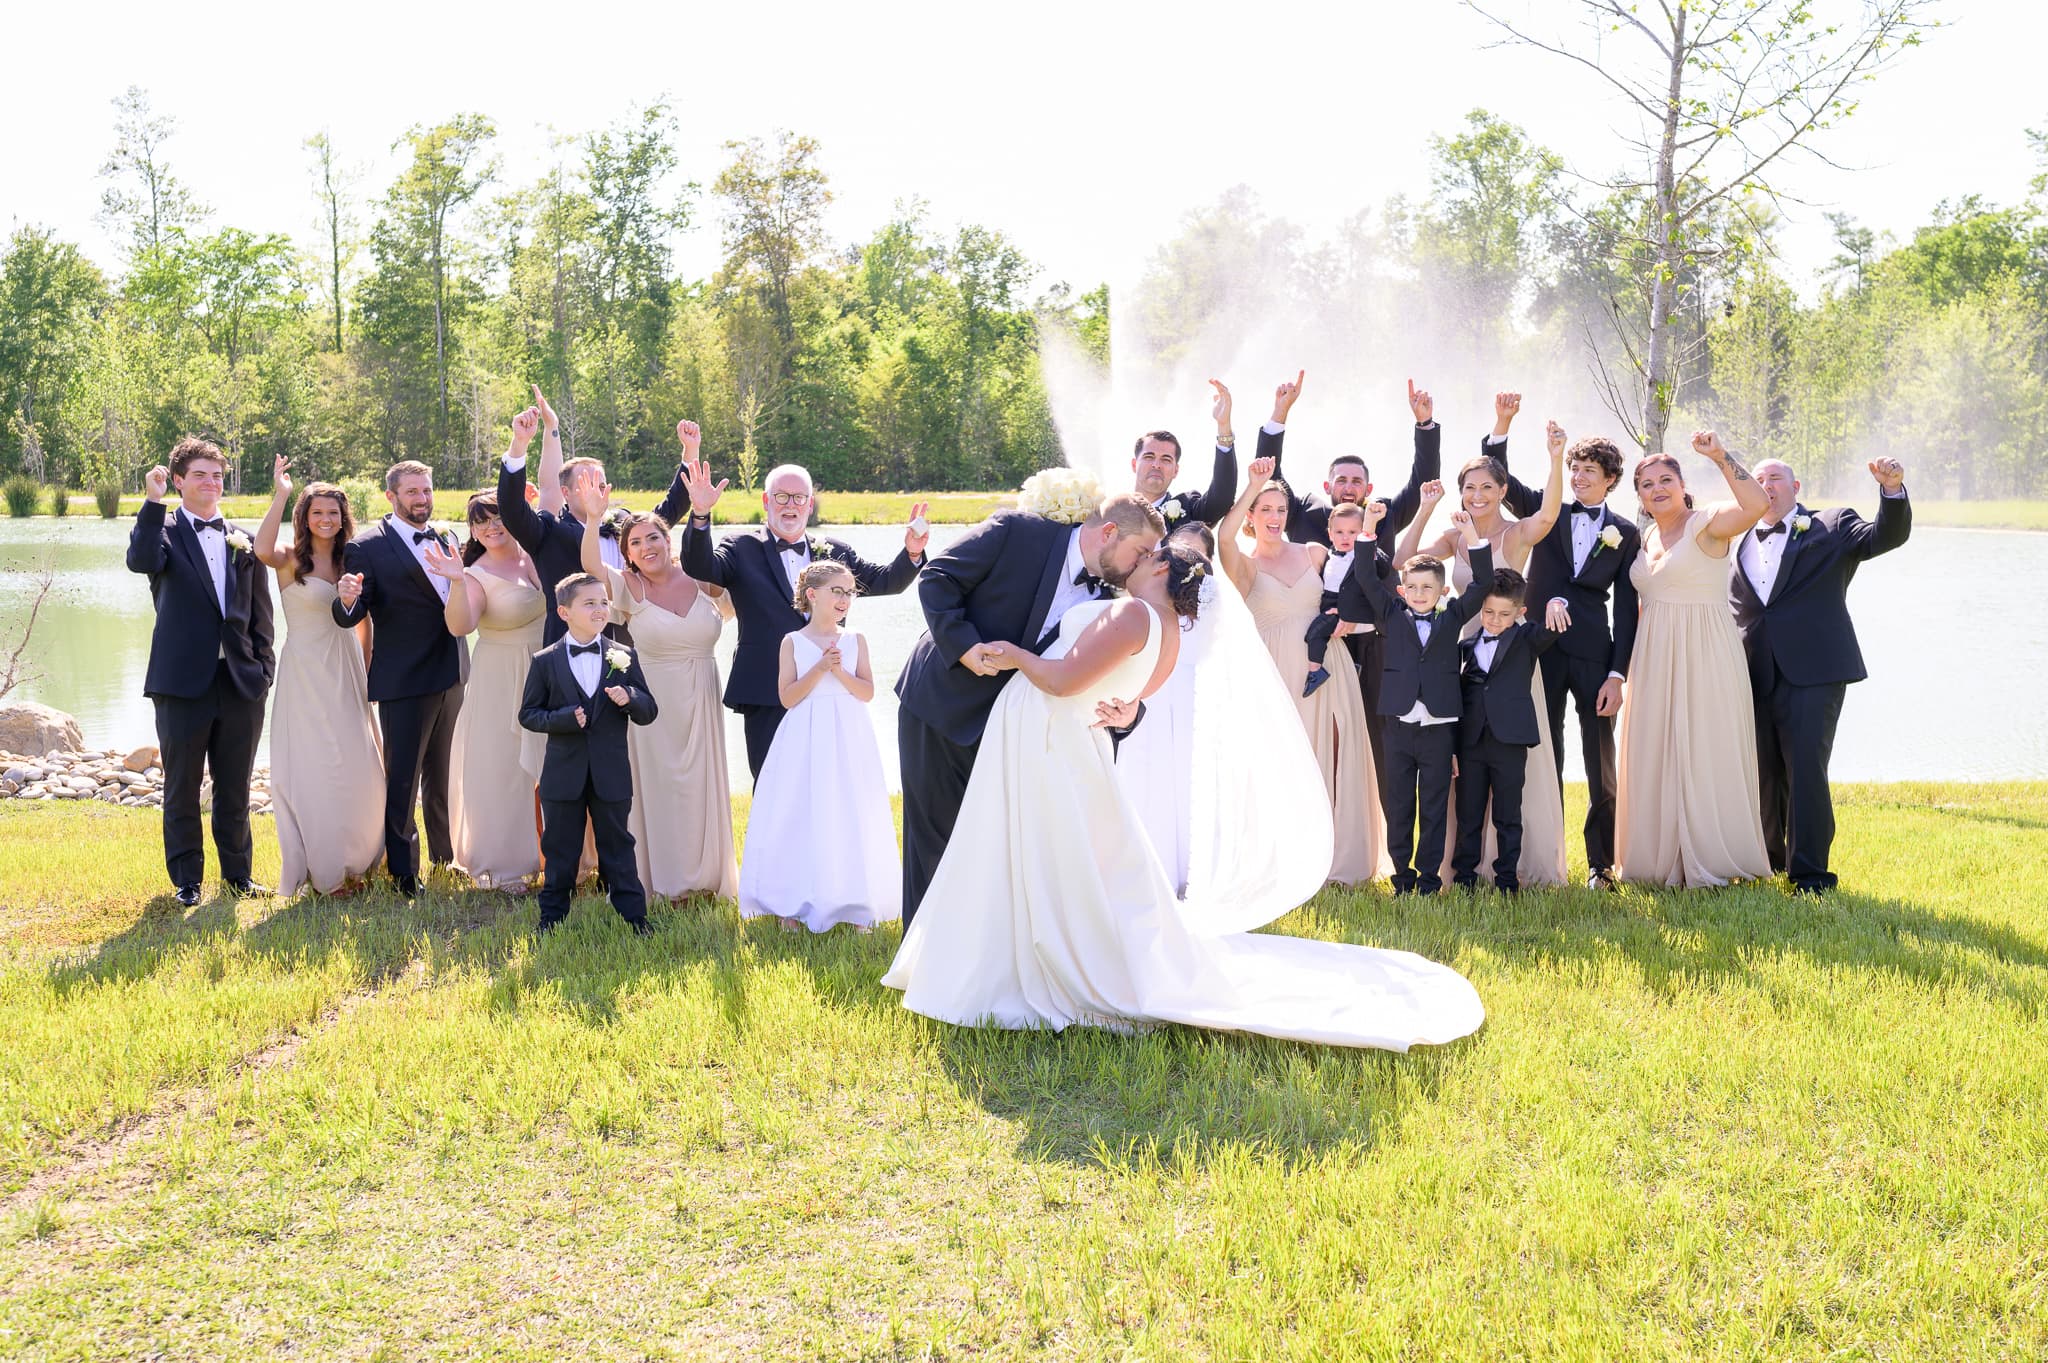 Bride and groom kissing with cheering bridal party in background - The Venue at White Oaks Farm